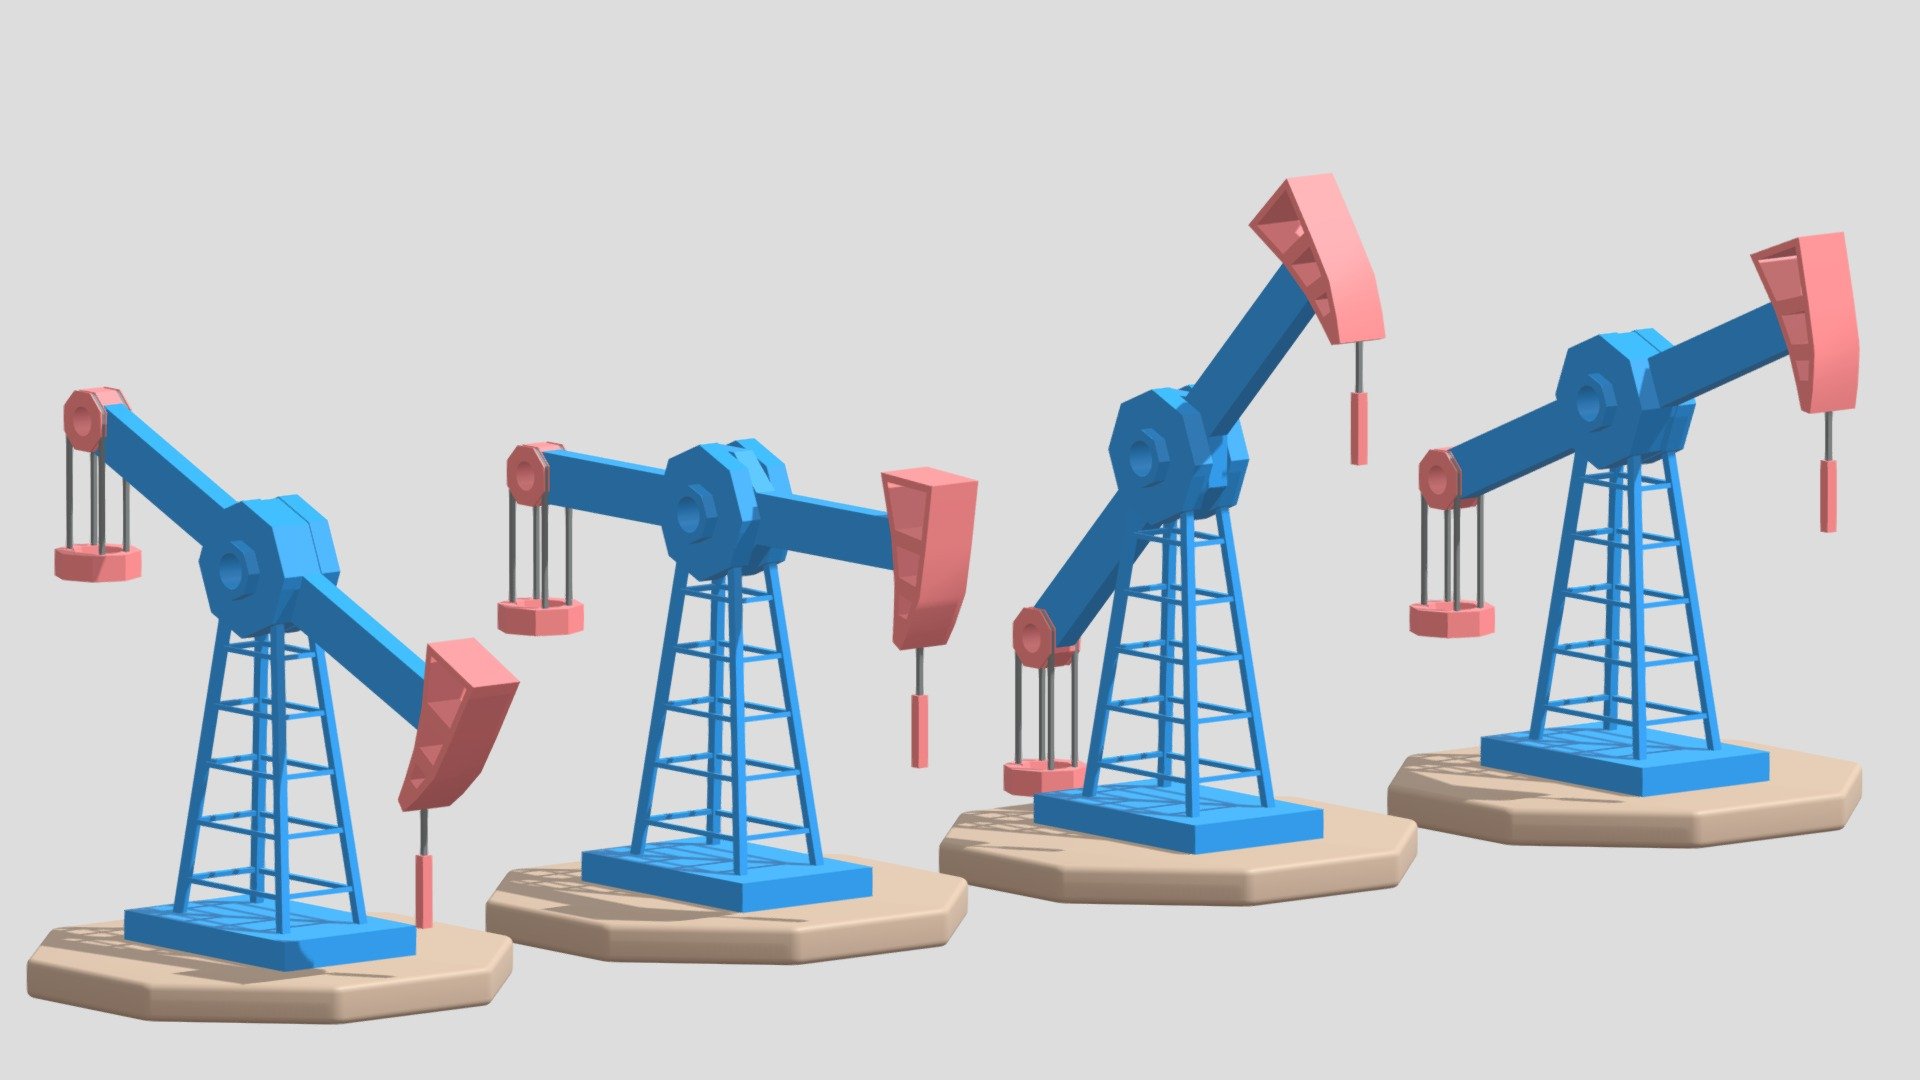 Cartoon Oil Pump Jack.

Made with Blender 2.8.

Rendered with Cycles.

system units : m.

Polygons: 1,293.

Vertices: 1,794.

Only material, No textures. You can change colors.

Formats: . blend . fbx . obj, c4d

If you have any question, please contact me.

Thank you 3d model